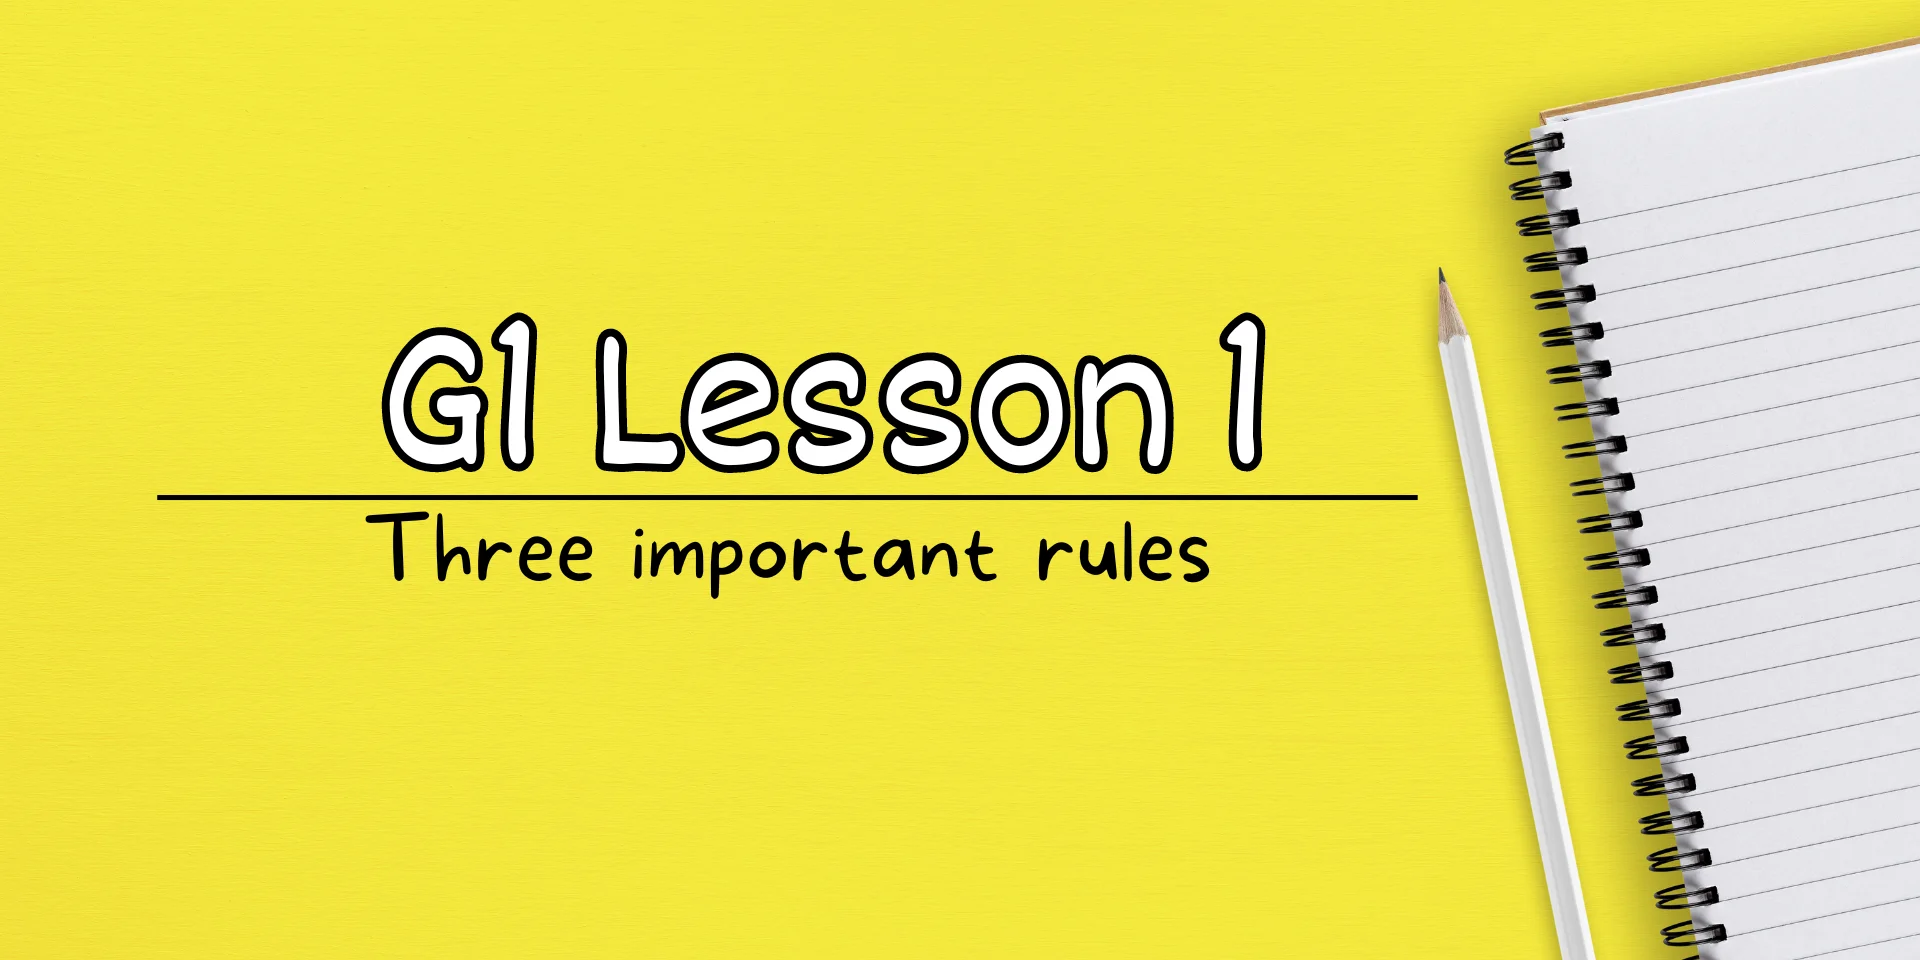 G1 Lesson 1 Three important rules